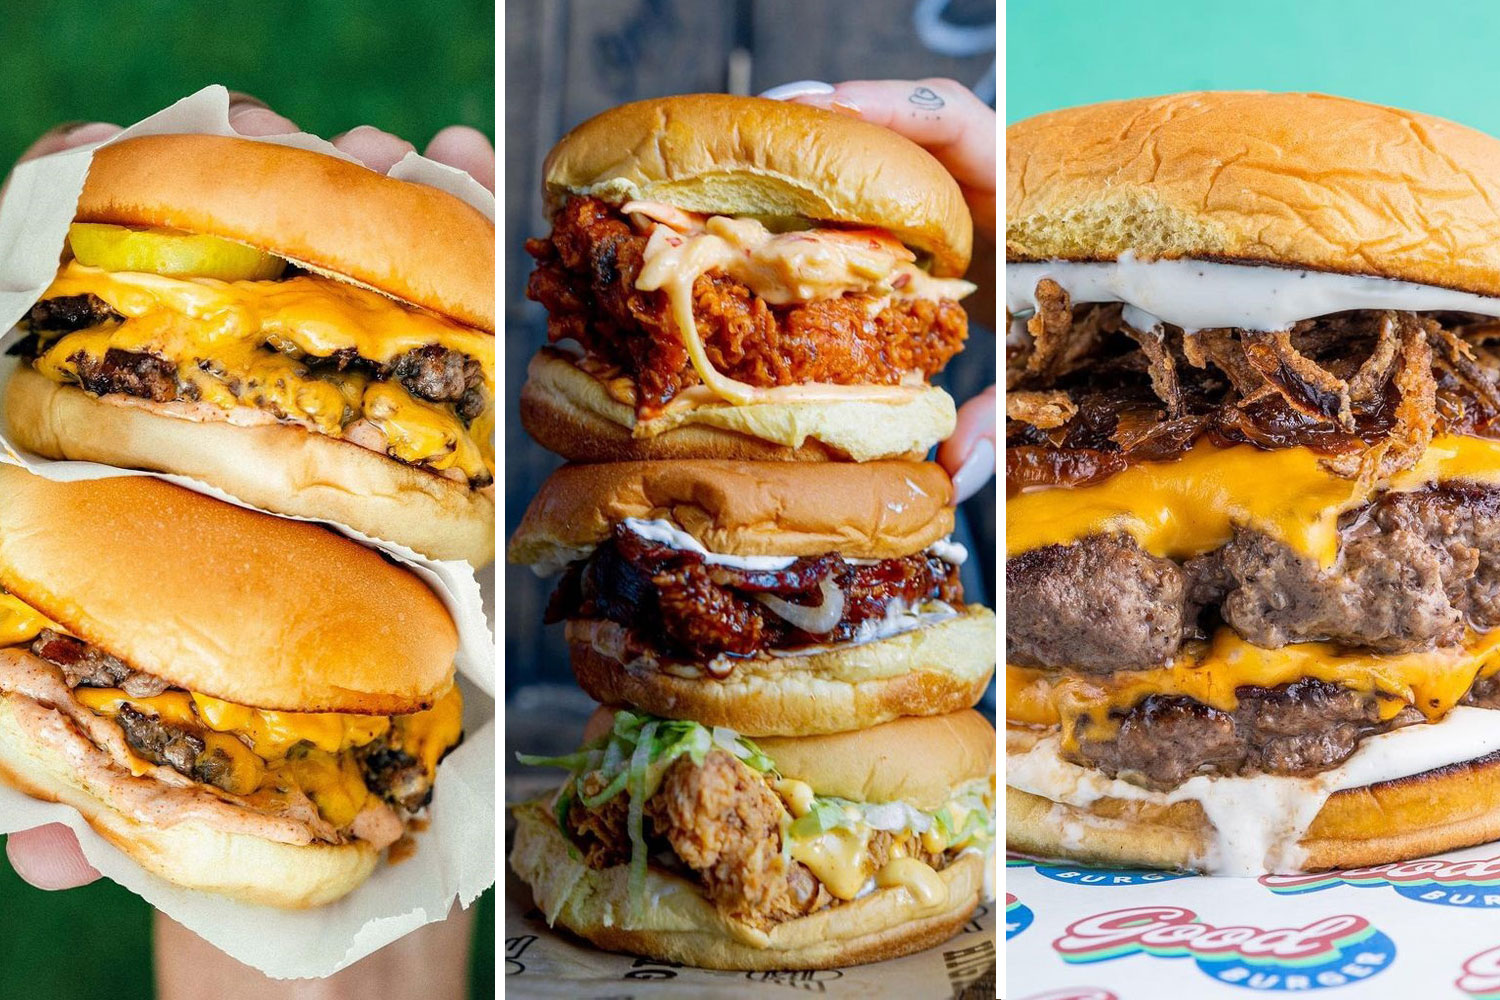 Drool alert: just pictures of juicy burgers | Restaurants | Time Out Dubai